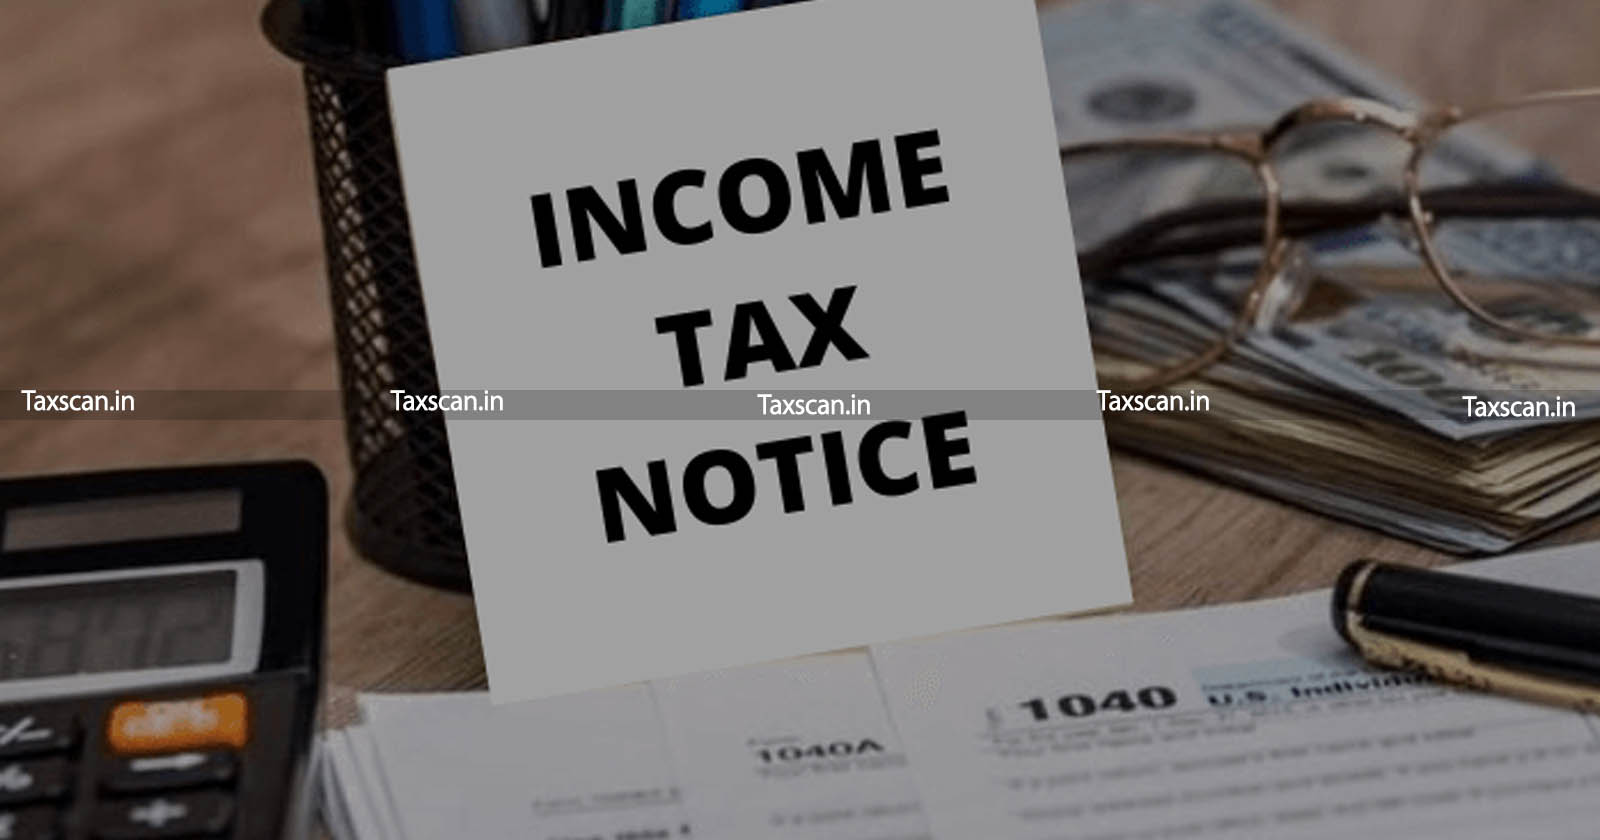 High Value Transactions - IT Radar - Income Tax Notice - High Value Transactions under IT Radar -Have you received this Income Tax Notice - taxscan